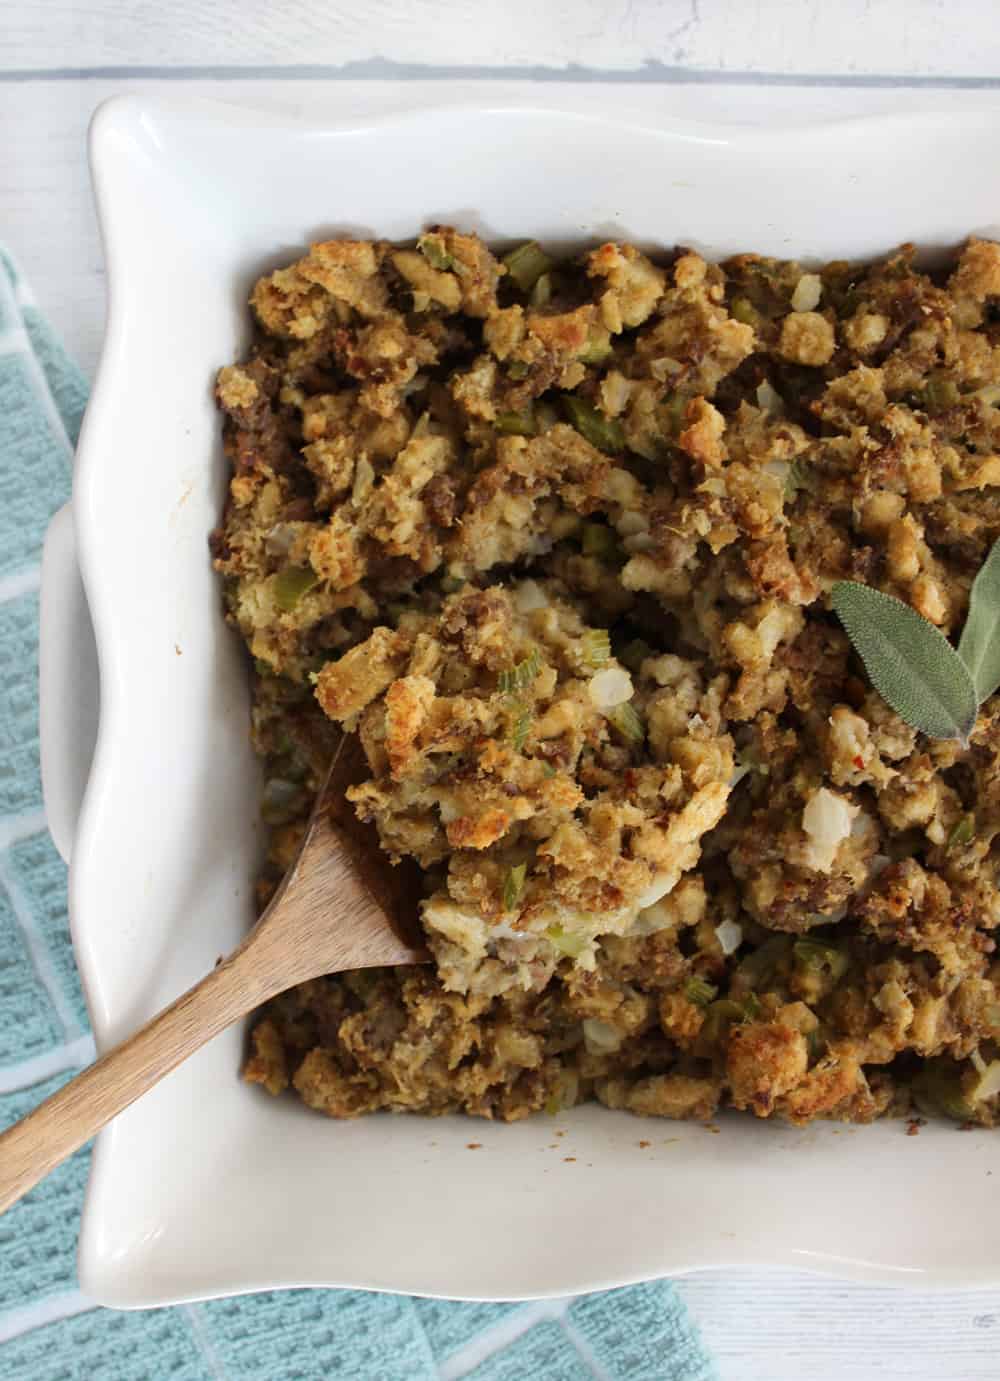 Literally the best ever stuffing recipe! Easy, hearty, and so delicious!